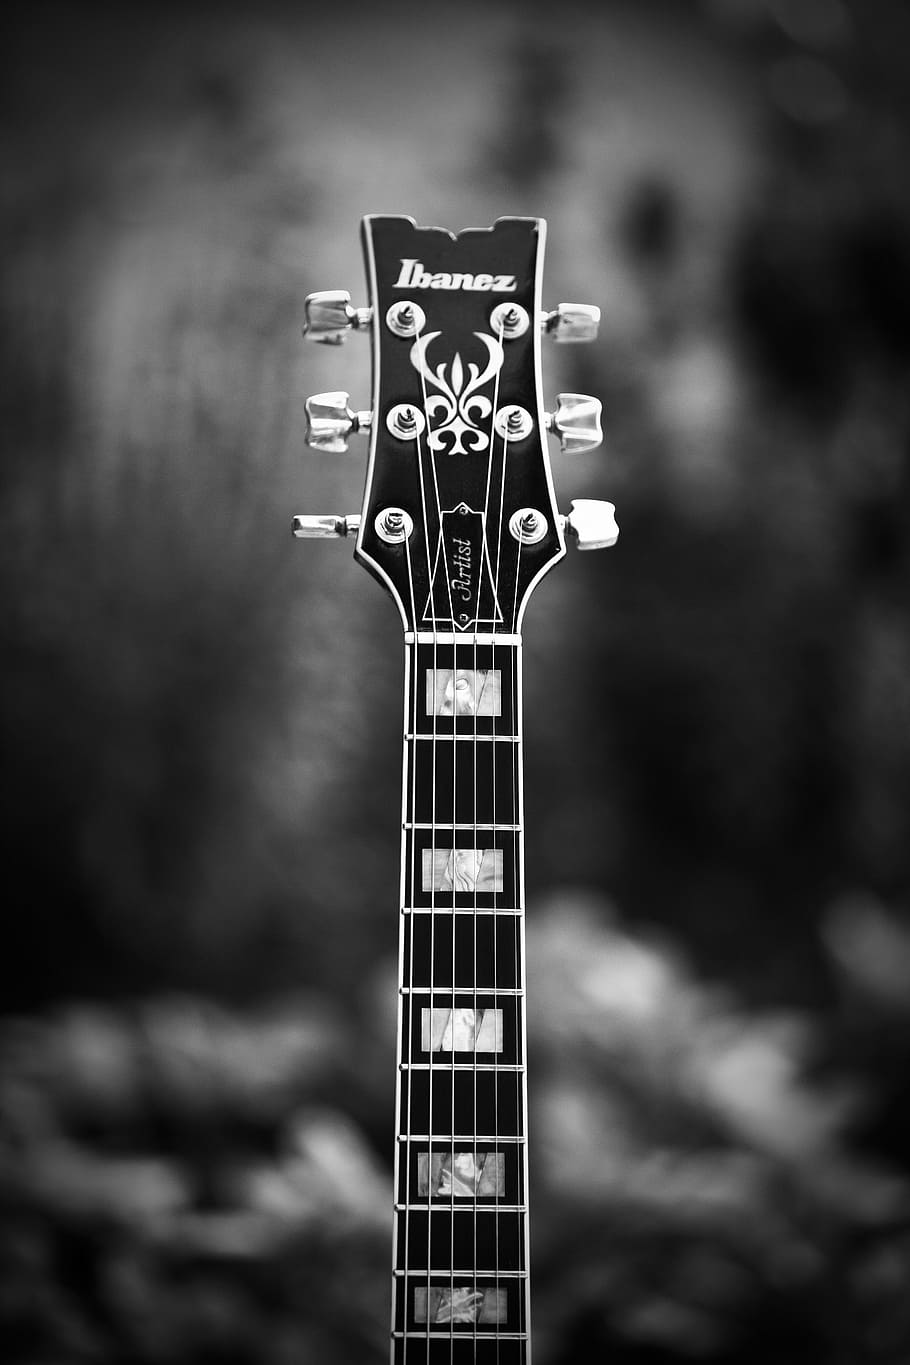 guitar, music, jam, focus on foreground, day, close-up, nature, metal, outdoors, musical equipment